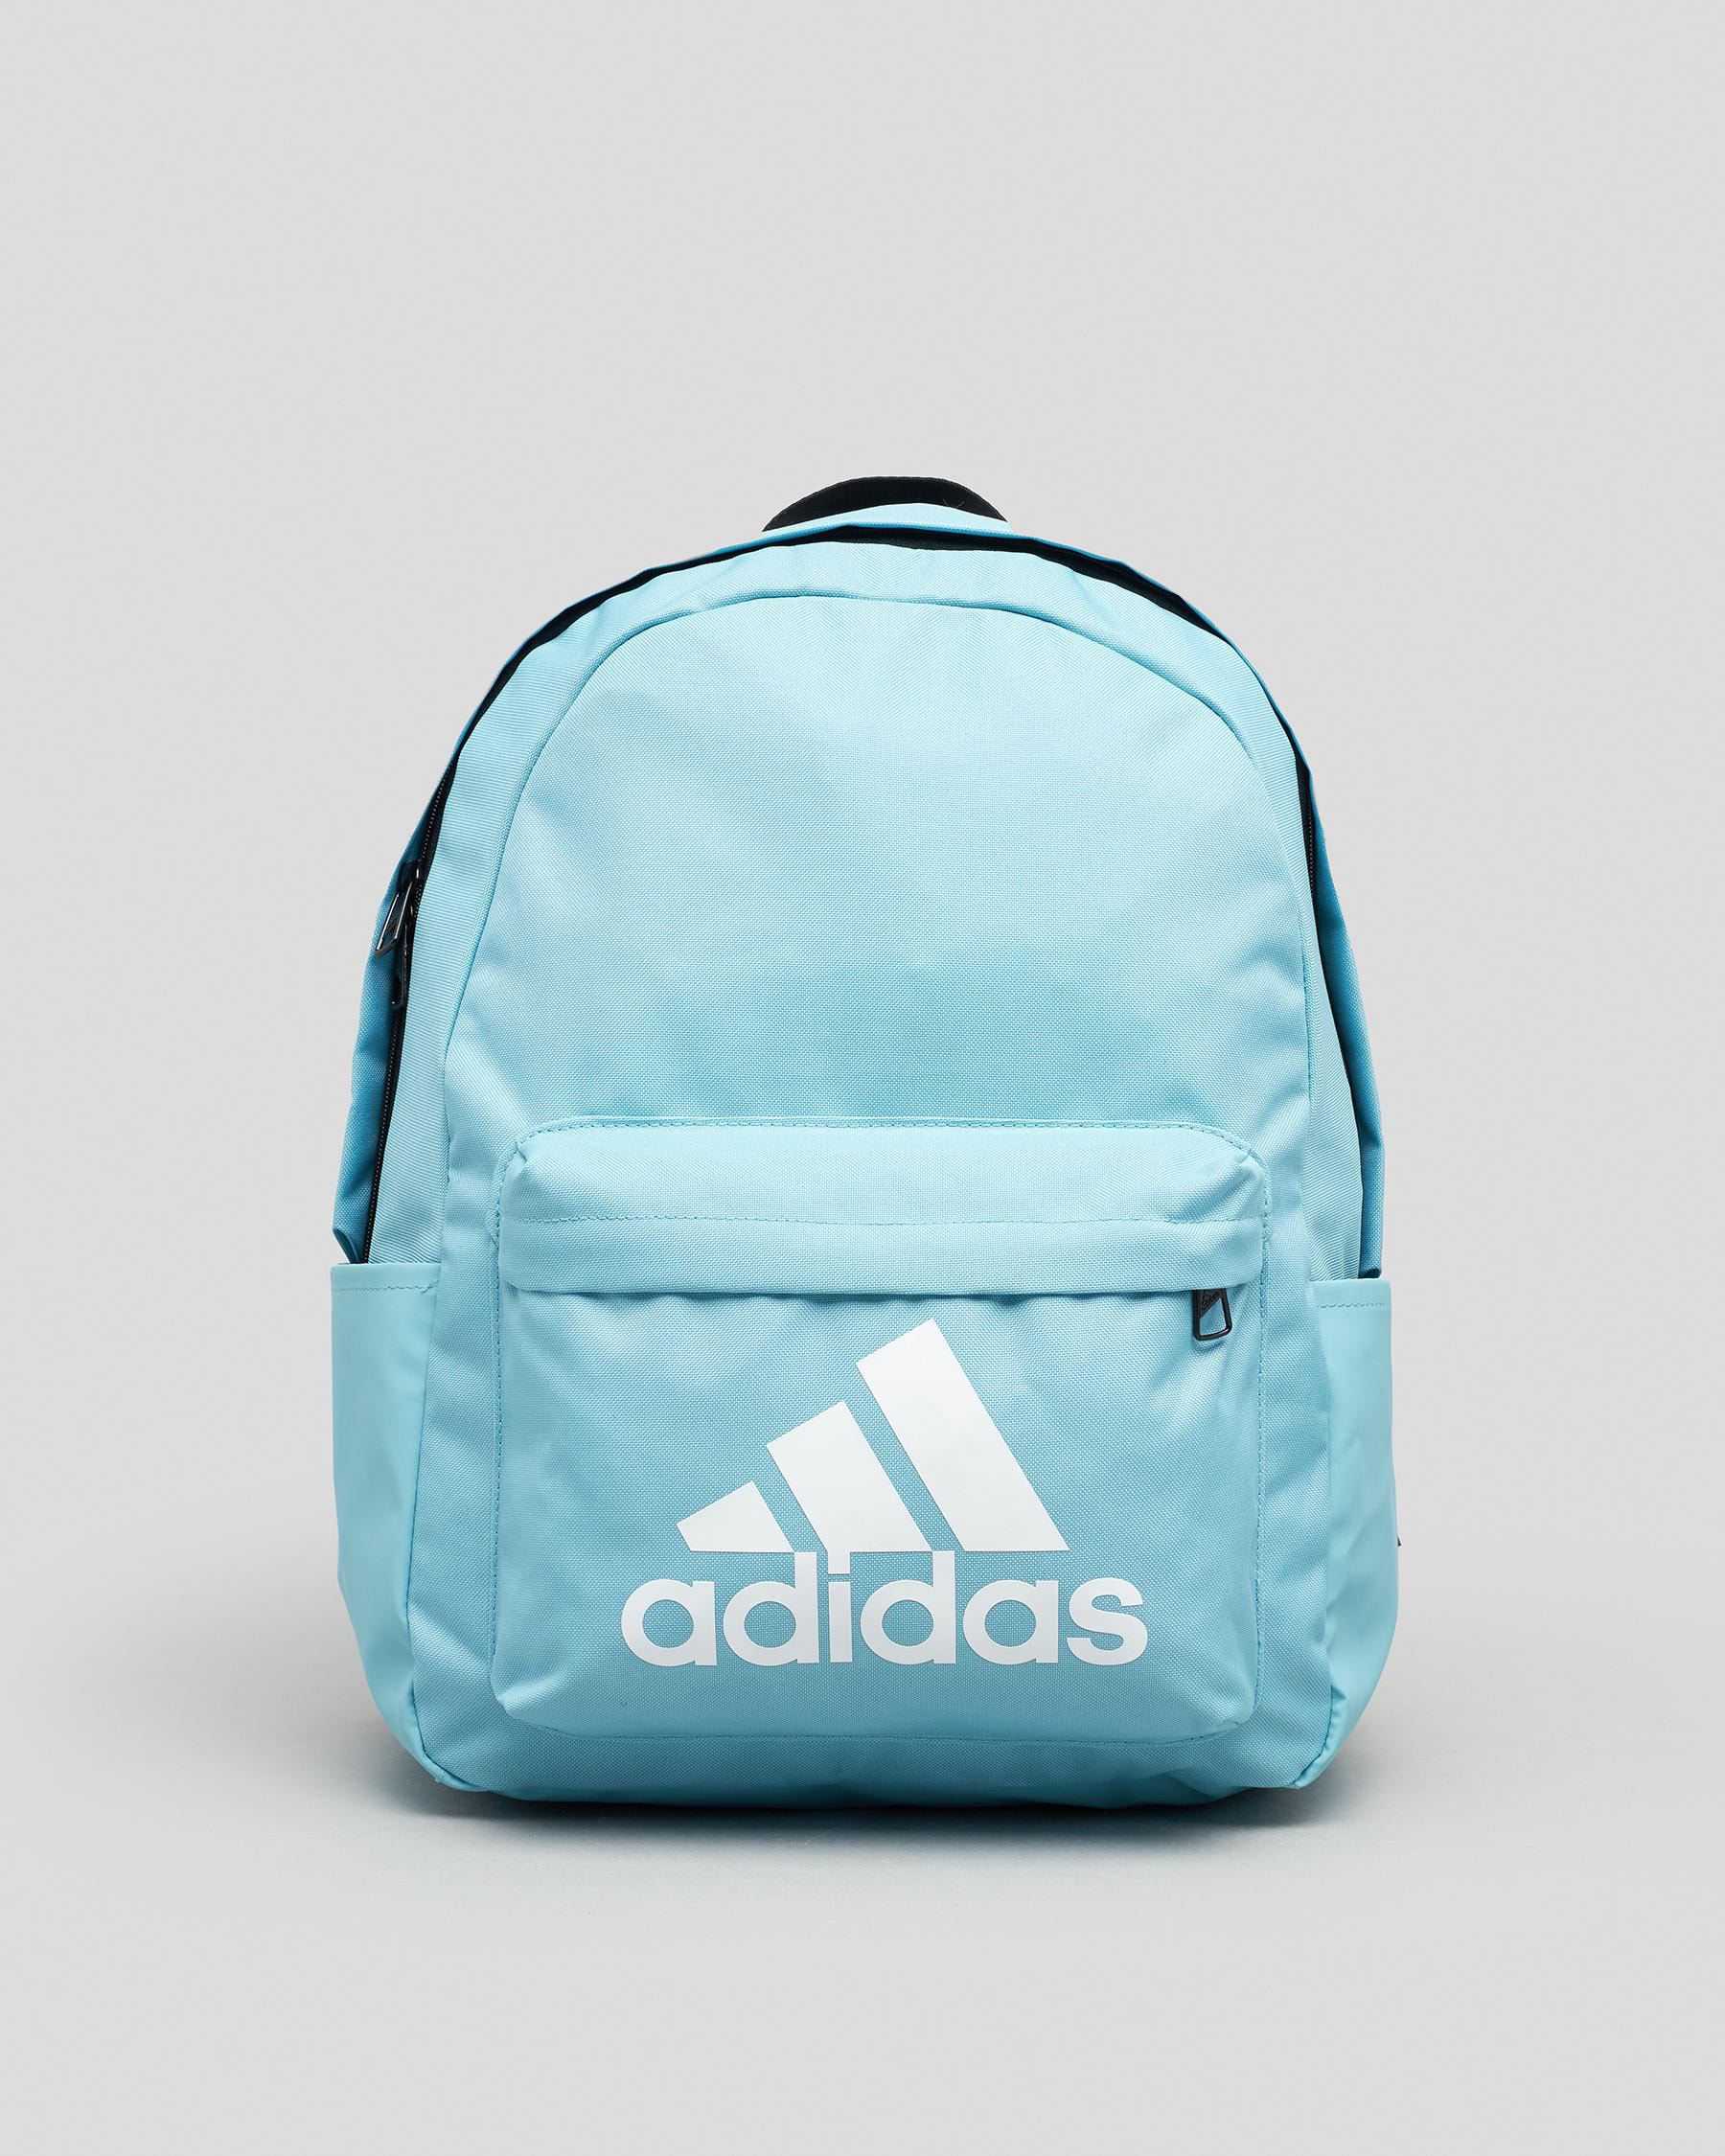 Adidas Classic BOS Backpack In Preloved Blue/white - Fast Shipping ...